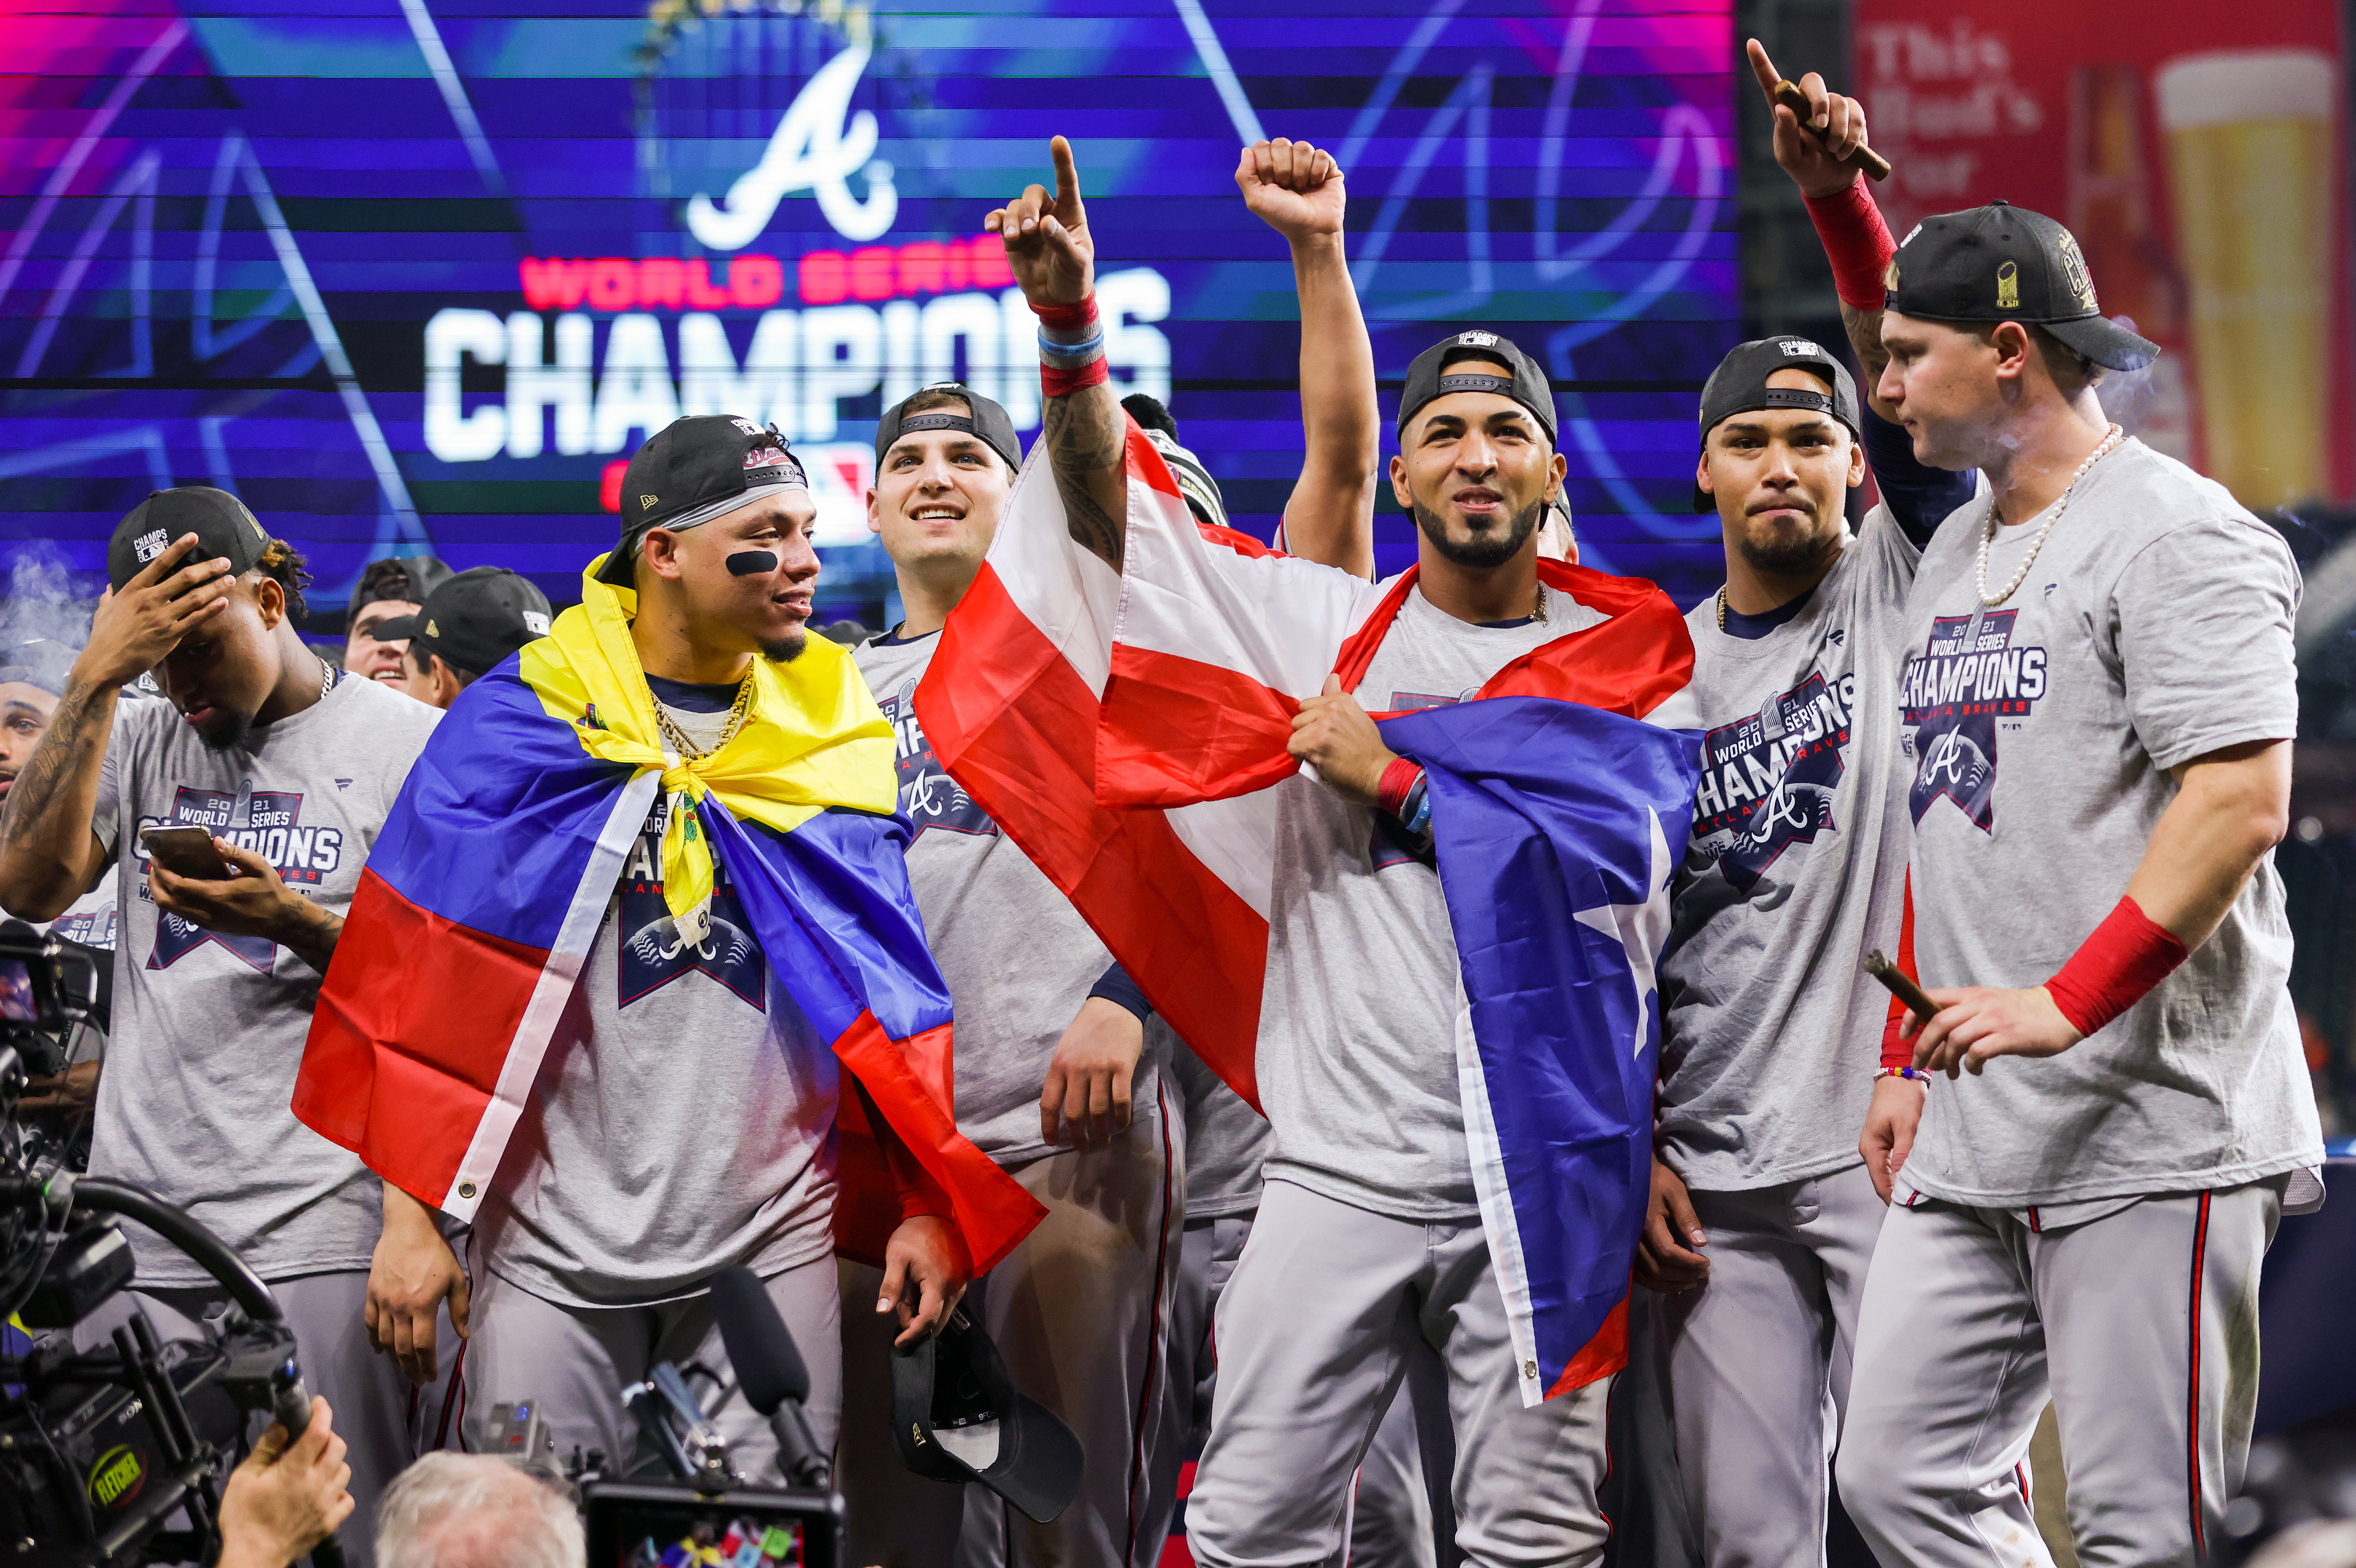 Braves Sent Wwe Championship Belt After 21 World Series Victory Vs Astros Bleacher Report Latest News Videos And Highlights